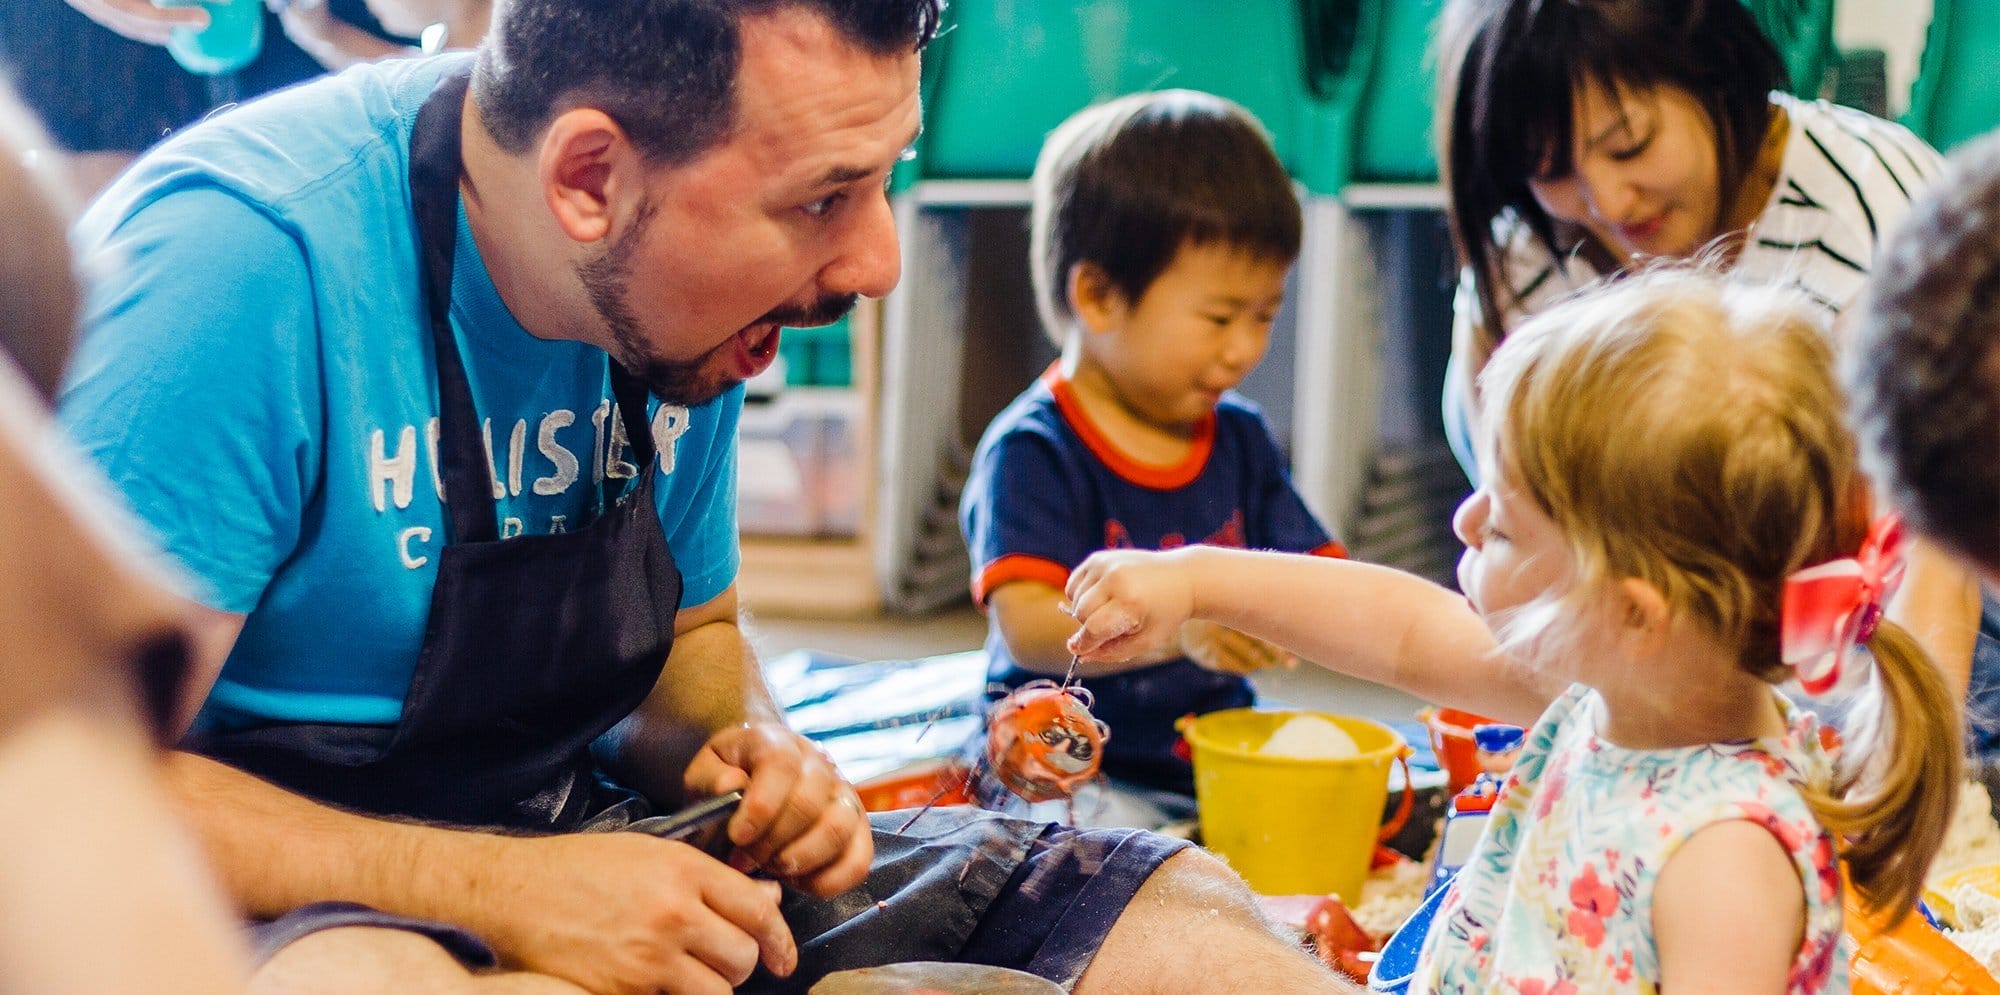 In the foreground, a smiling dad engages with his daughter as they play with a textile toy. In the background, a mum and her son are busy playing with sand and buckets.